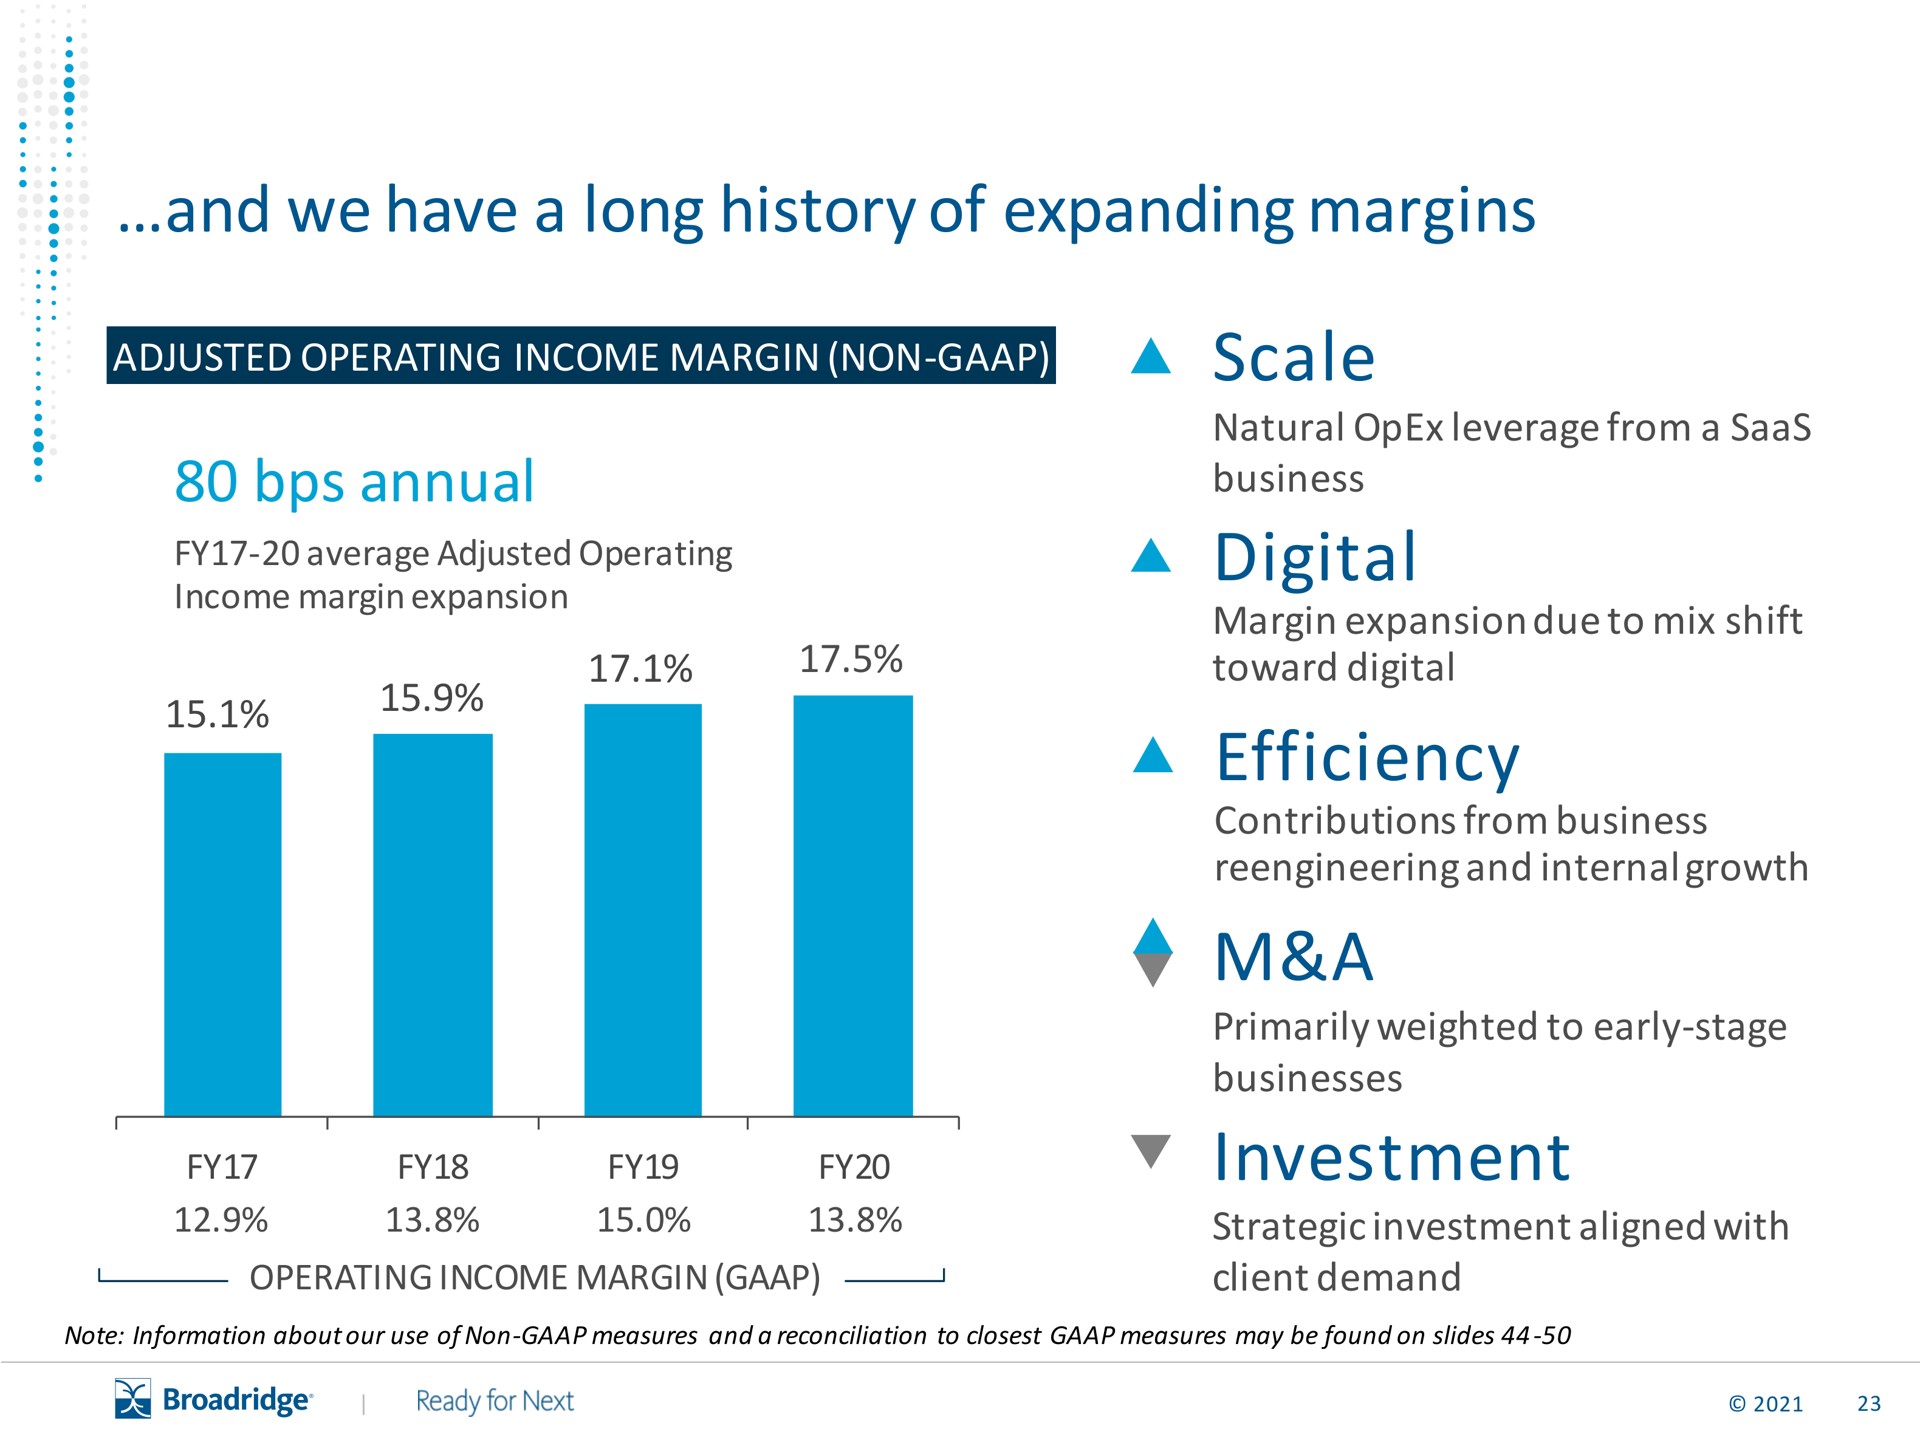 and we have a long history of expanding margins annual scale digital efficiency a investment i ade | Broadridge Financial Solutions